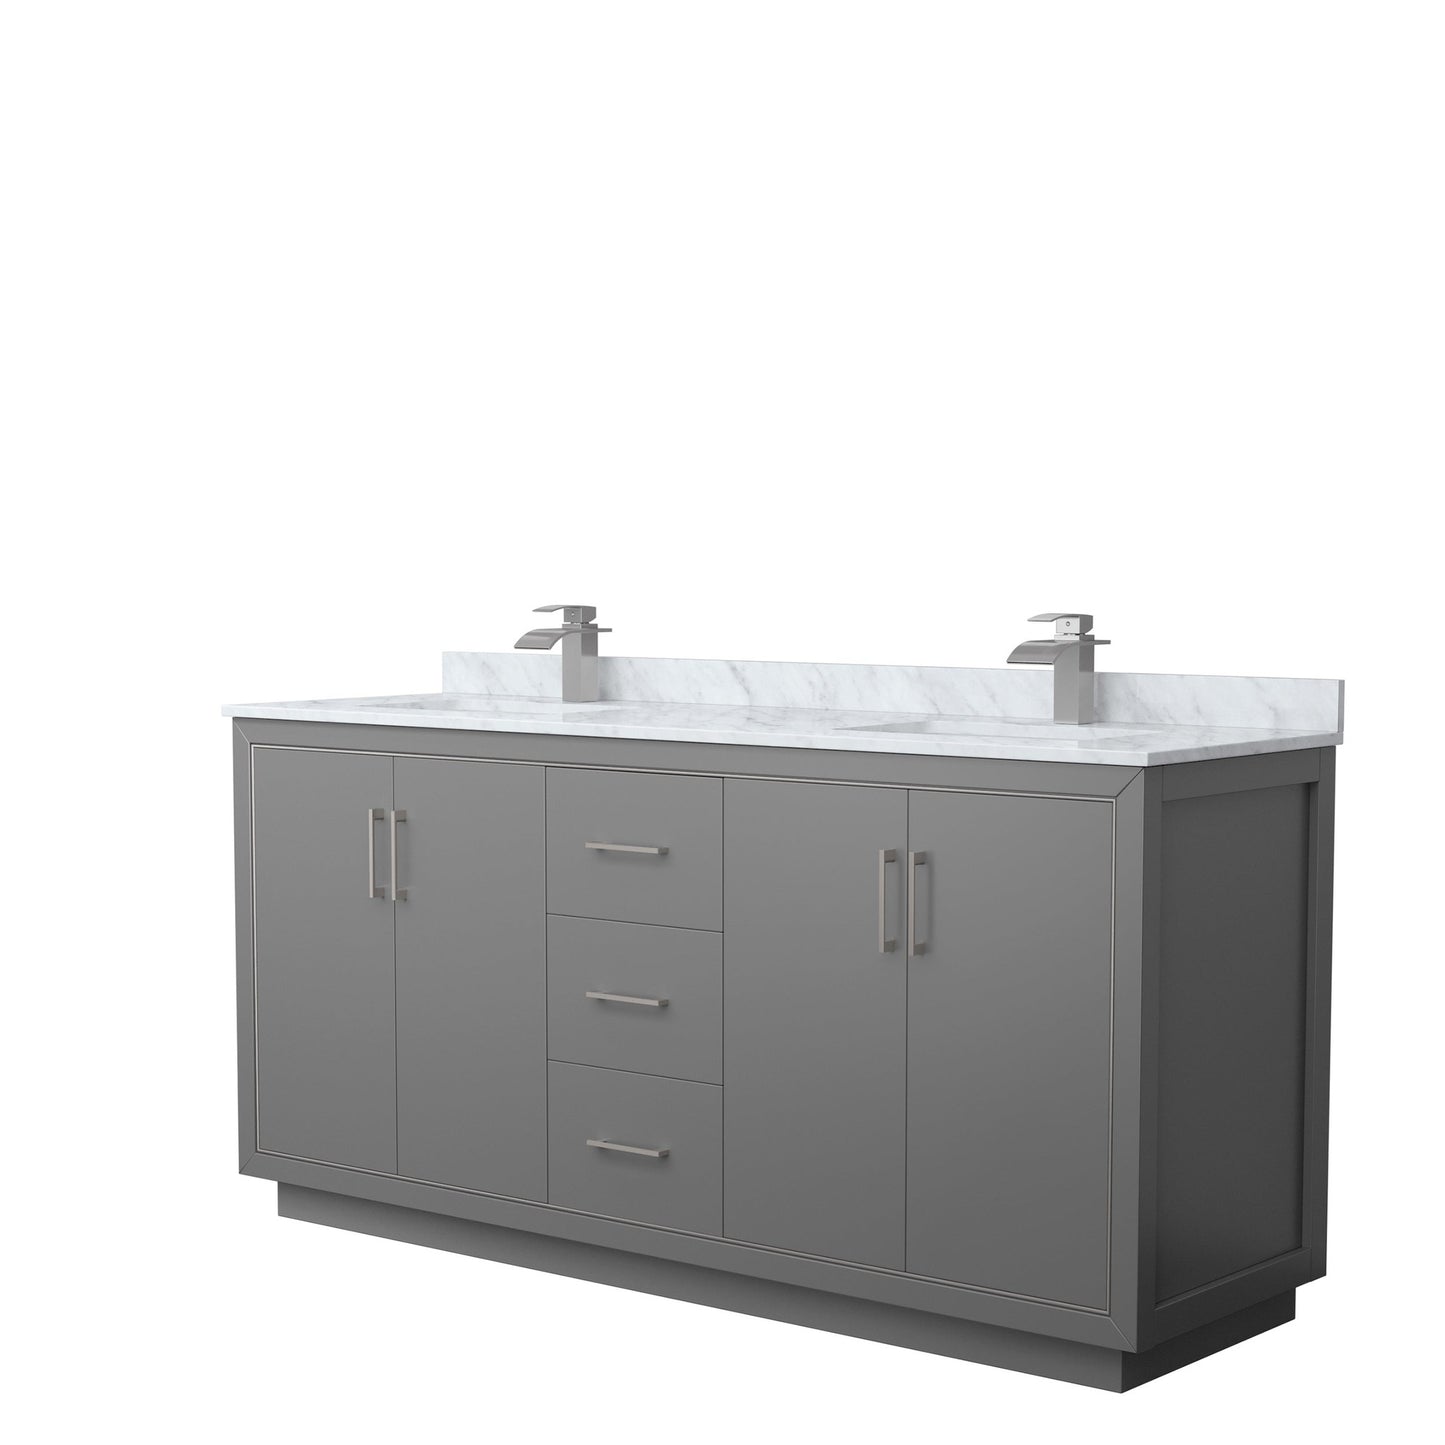 Wyndham Collection Icon 72" Double Bathroom Vanity in Dark Gray, White Carrara Marble Countertop, Undermount Square Sinks, Brushed Nickel Trim